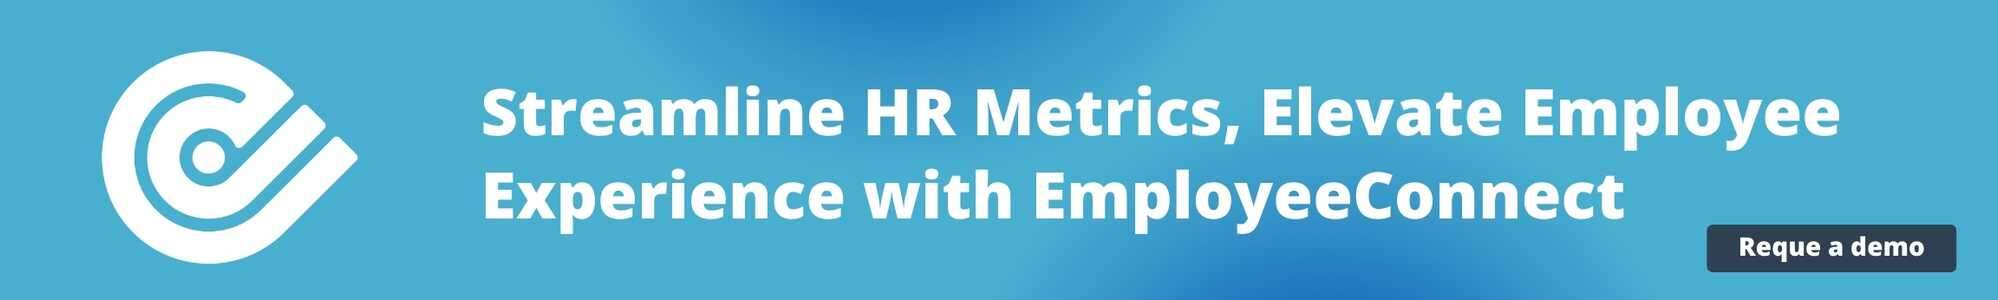 Streamline HR metrics, elevate employee experience with EmployeeConnect